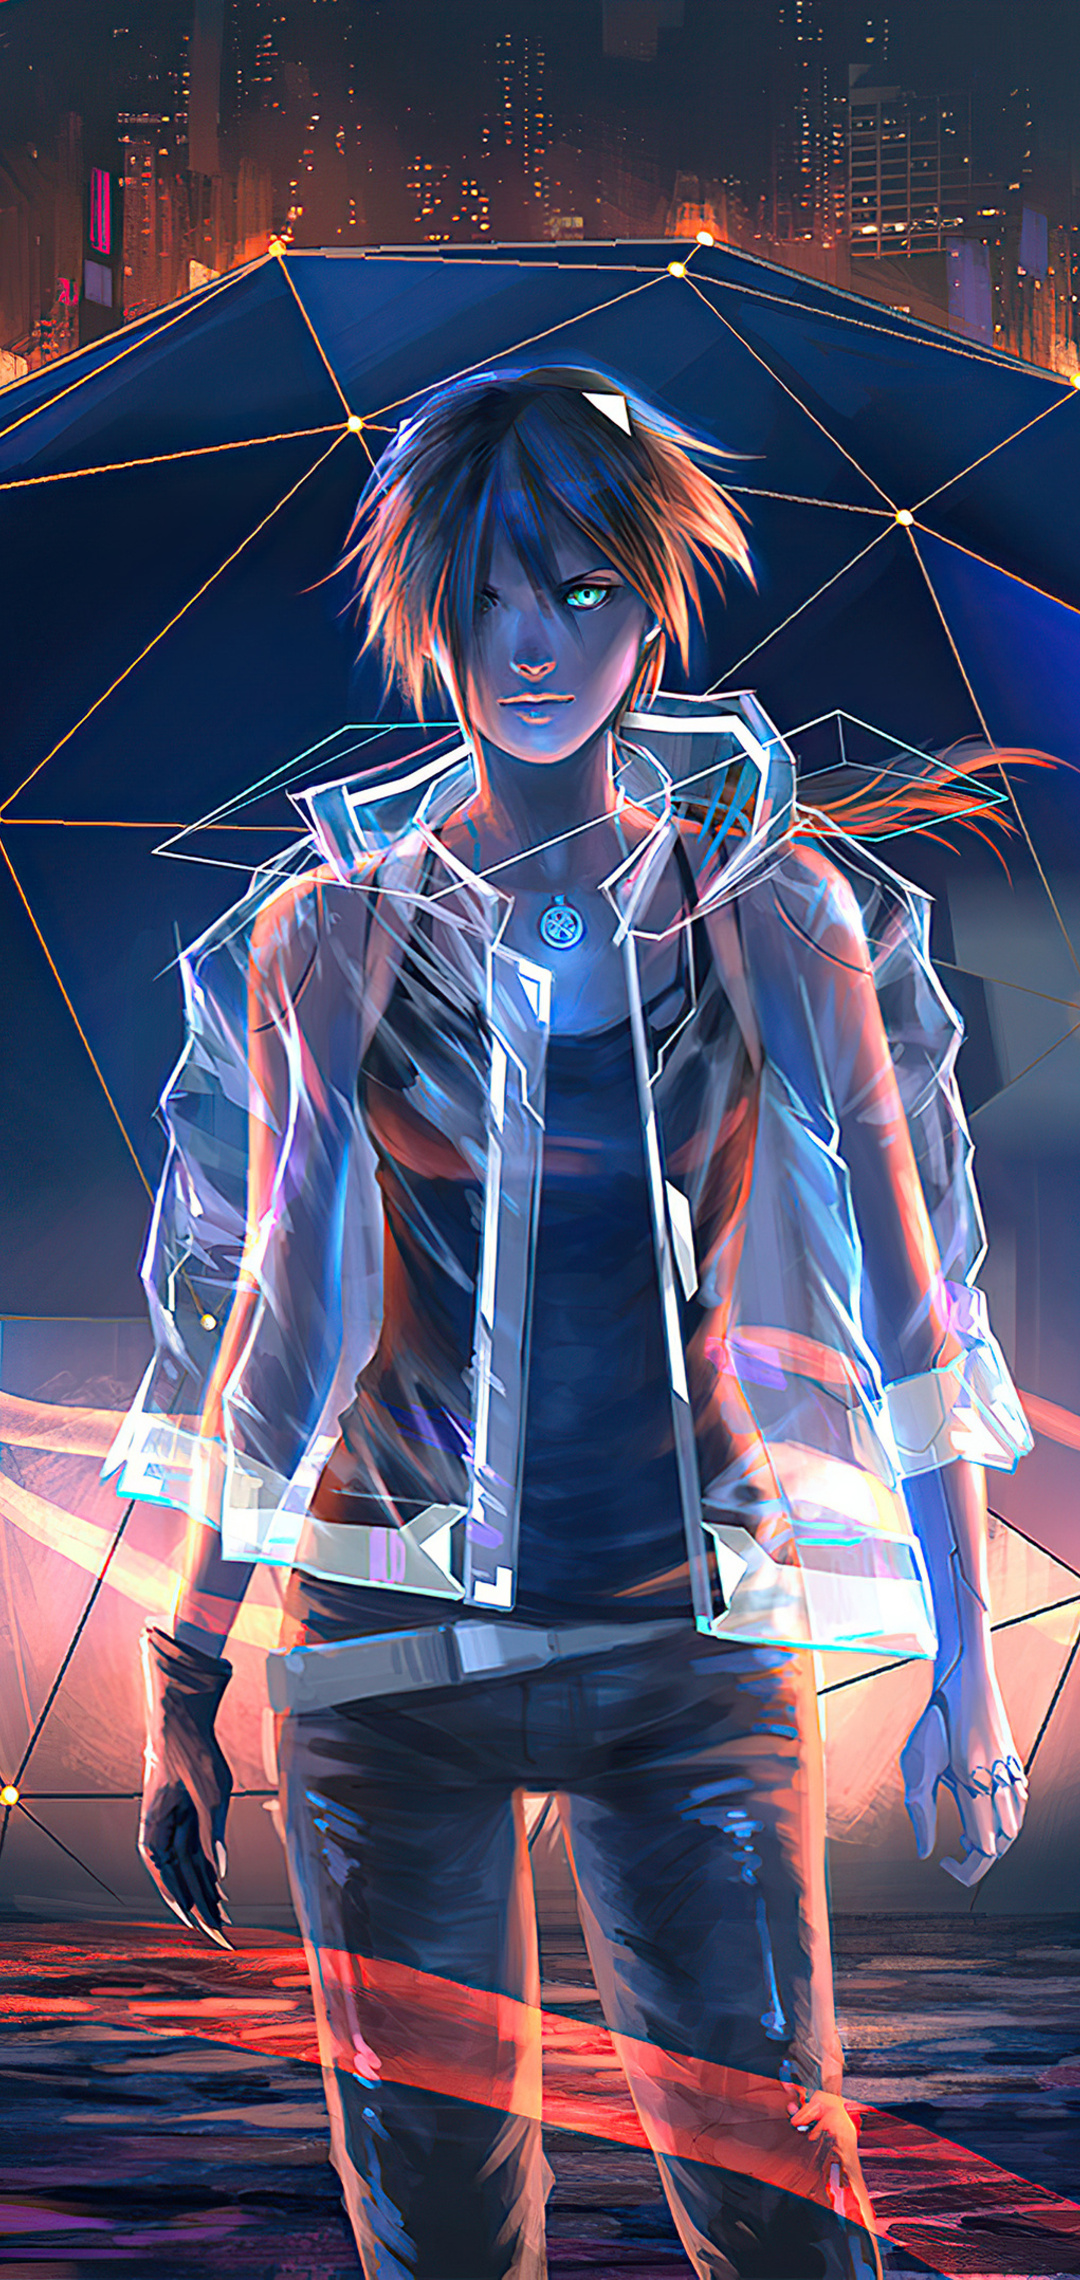 1080x2280 Night City Anime Boy 4k One Plus 6,Huawei p20,Honor view 10,Vivo  y85,Oppo f7,Xiaomi Mi A2 HD 4k Wallpapers, Images, Backgrounds, Photos and  Pictures